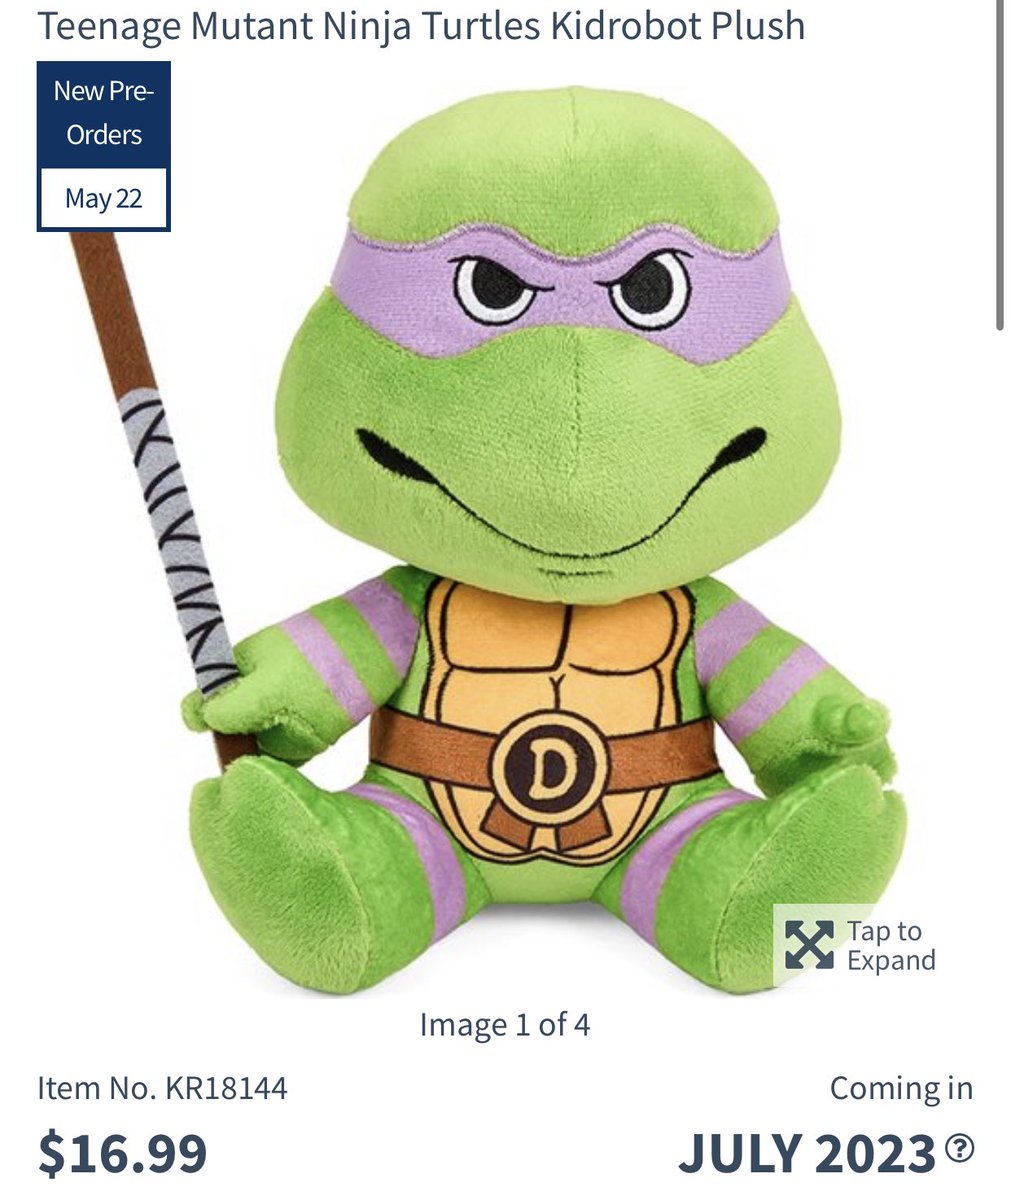 TMNT Phunny plushies are up for preorder through Entertainment Earth. ($16.99) each 
➖
- ee.toys/ZG8R6B
➖
Spend $59+ and get FREE SHIPPING with code Freeship59 at checkout. 
➖
#TurtleLair #TMNT #haulathon
#teenagemutantninjaturtles